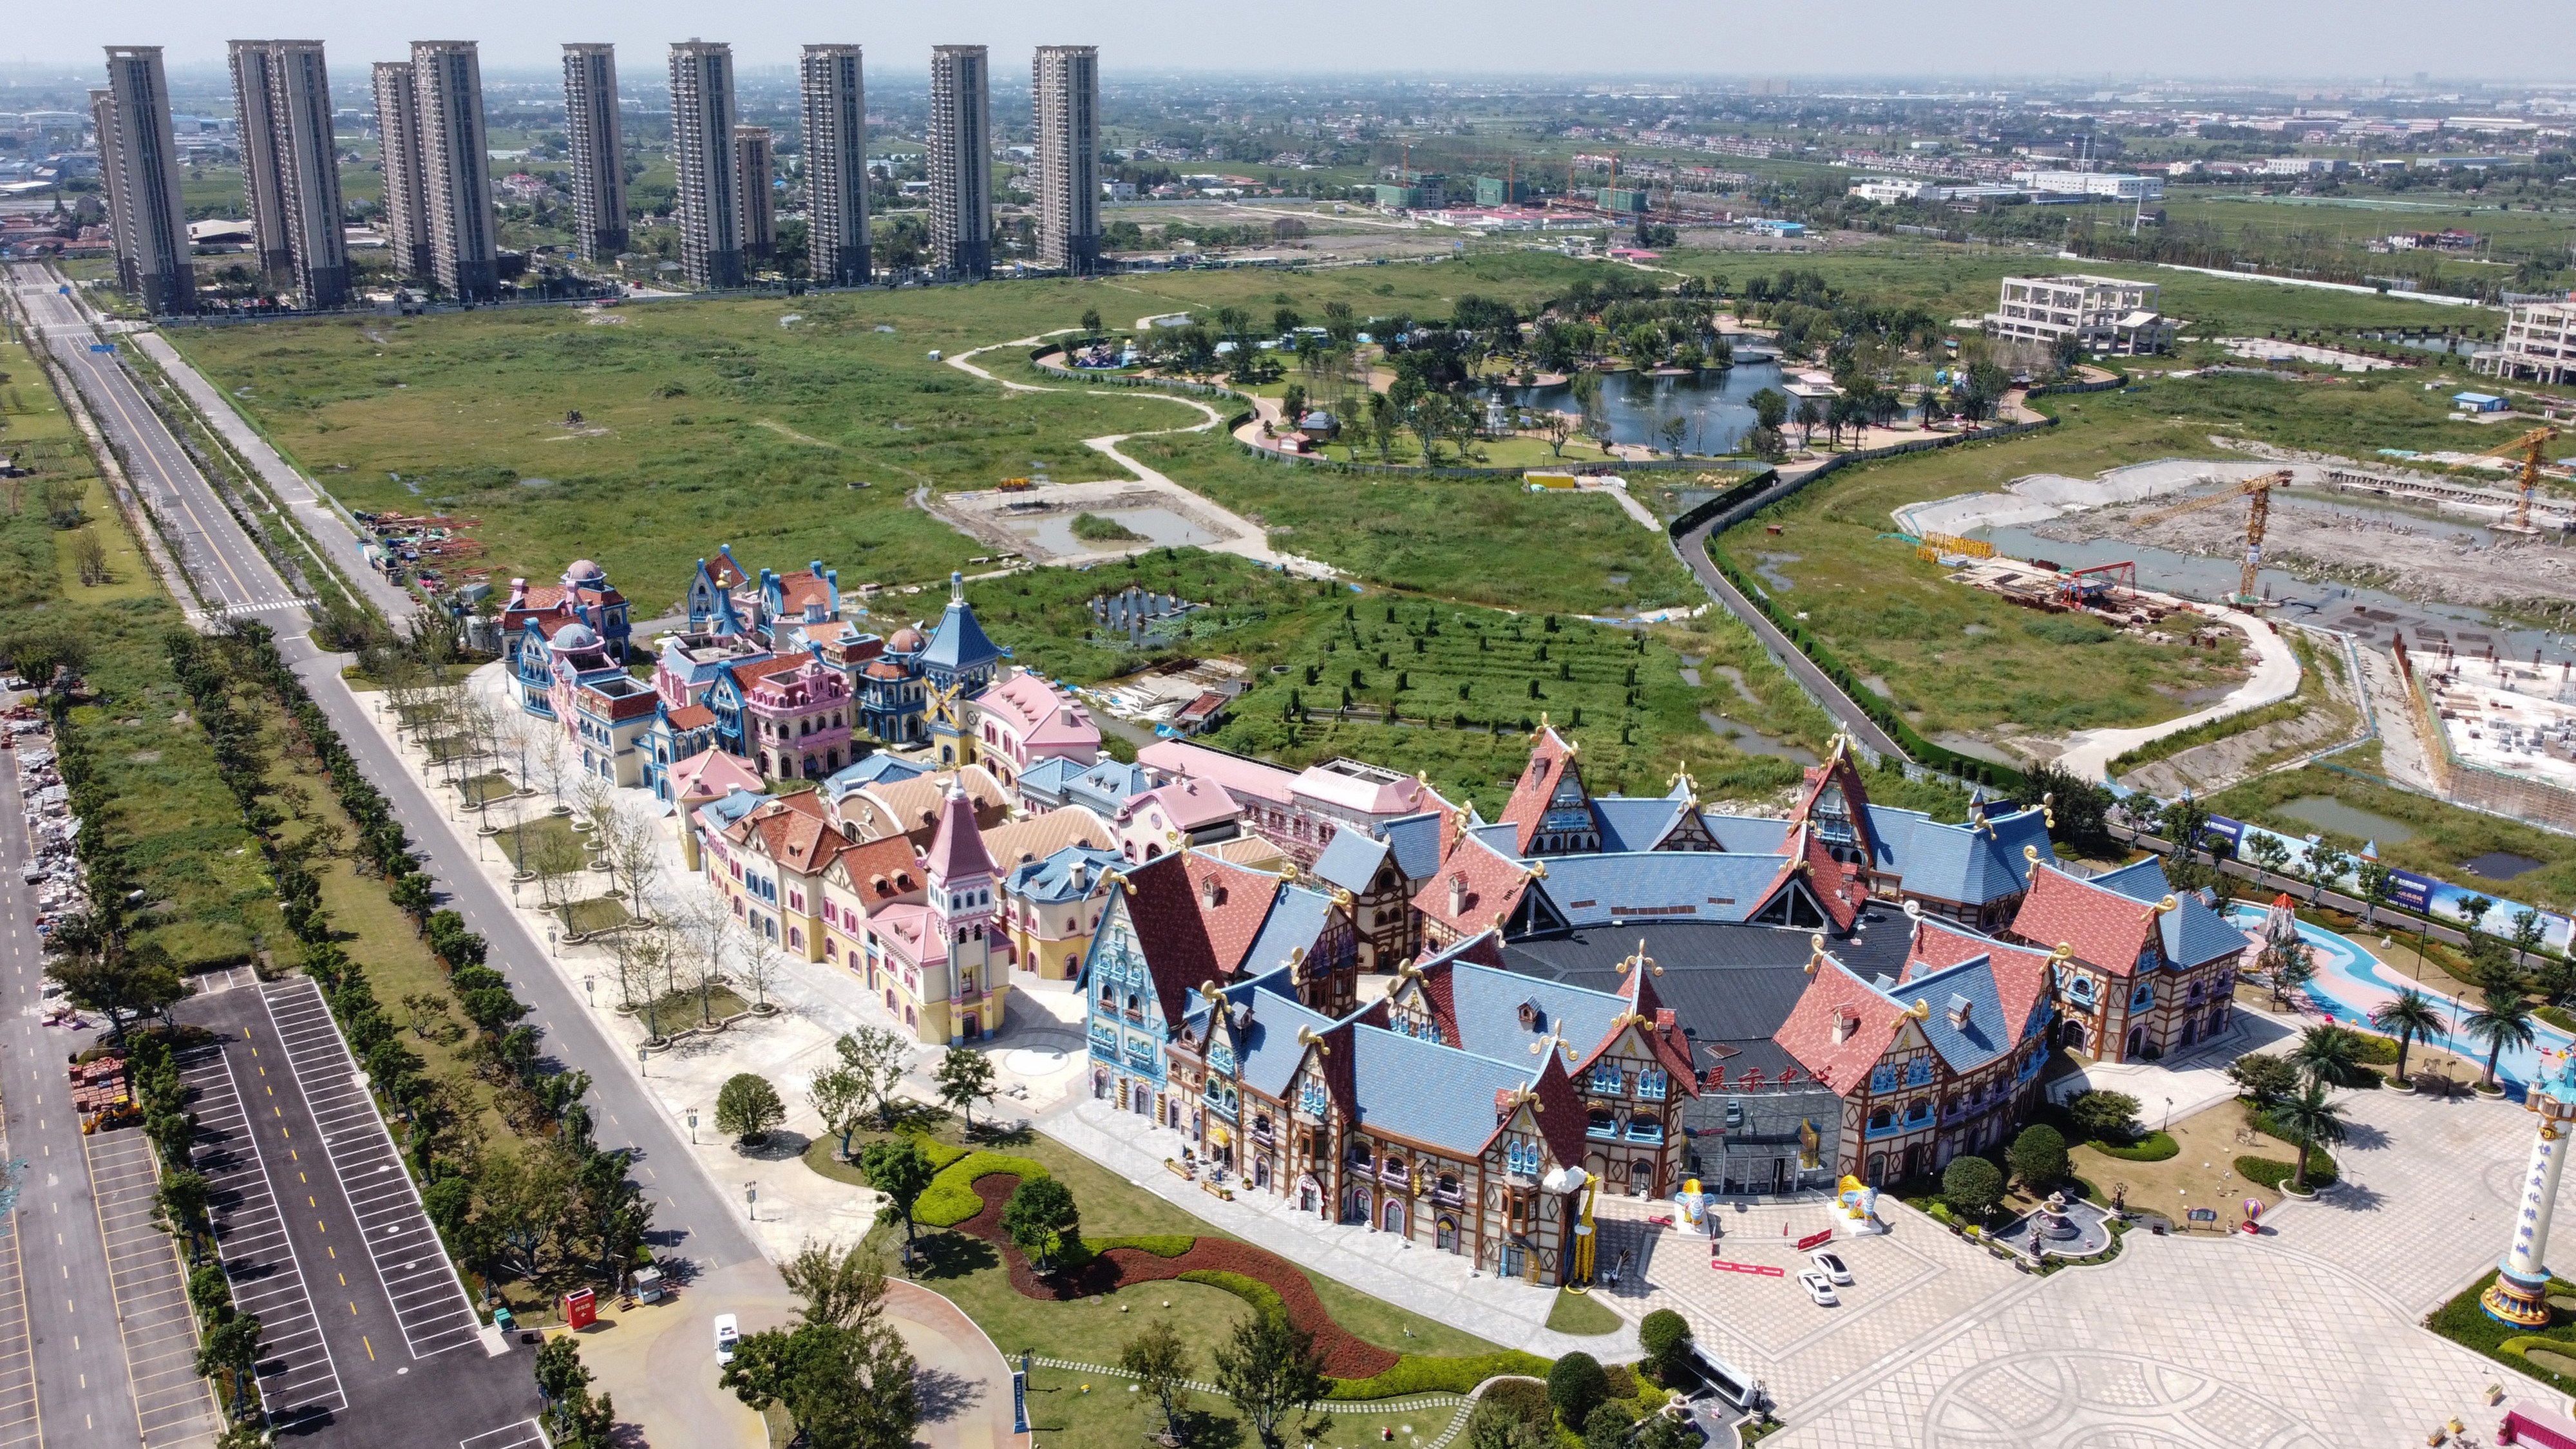 Evergrande Cultural Tourism City, a mixed-used residential-retail-entertainment development, in Taicang, Suzhou city, in China’s eastern Jiangsu province.